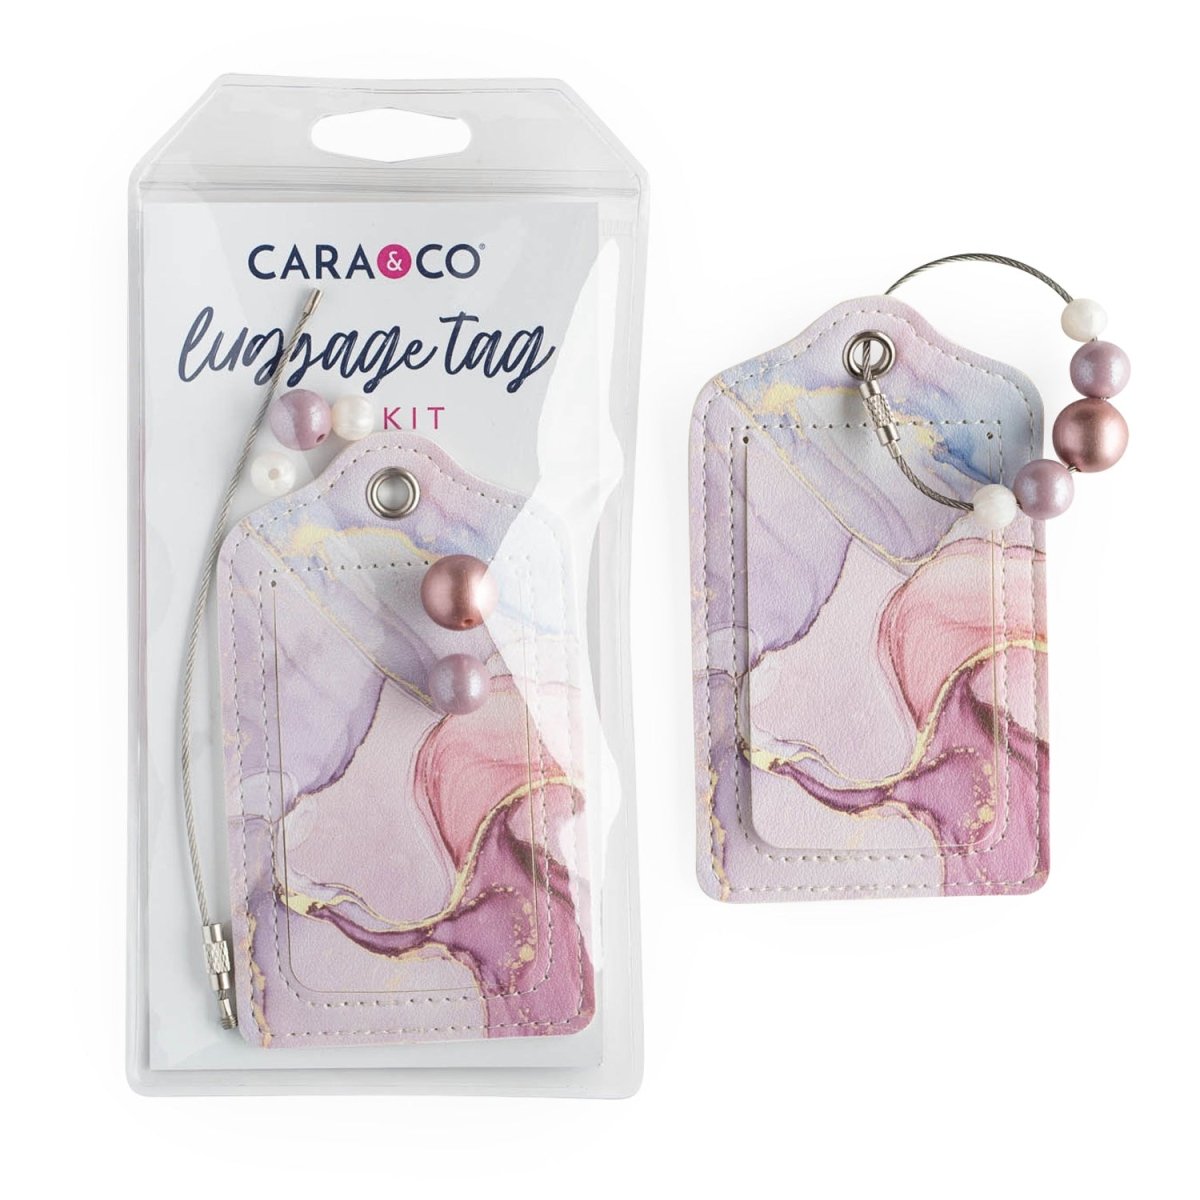 Silicone DIY Kits Luxury Swirl from Cara & Co Craft Supply